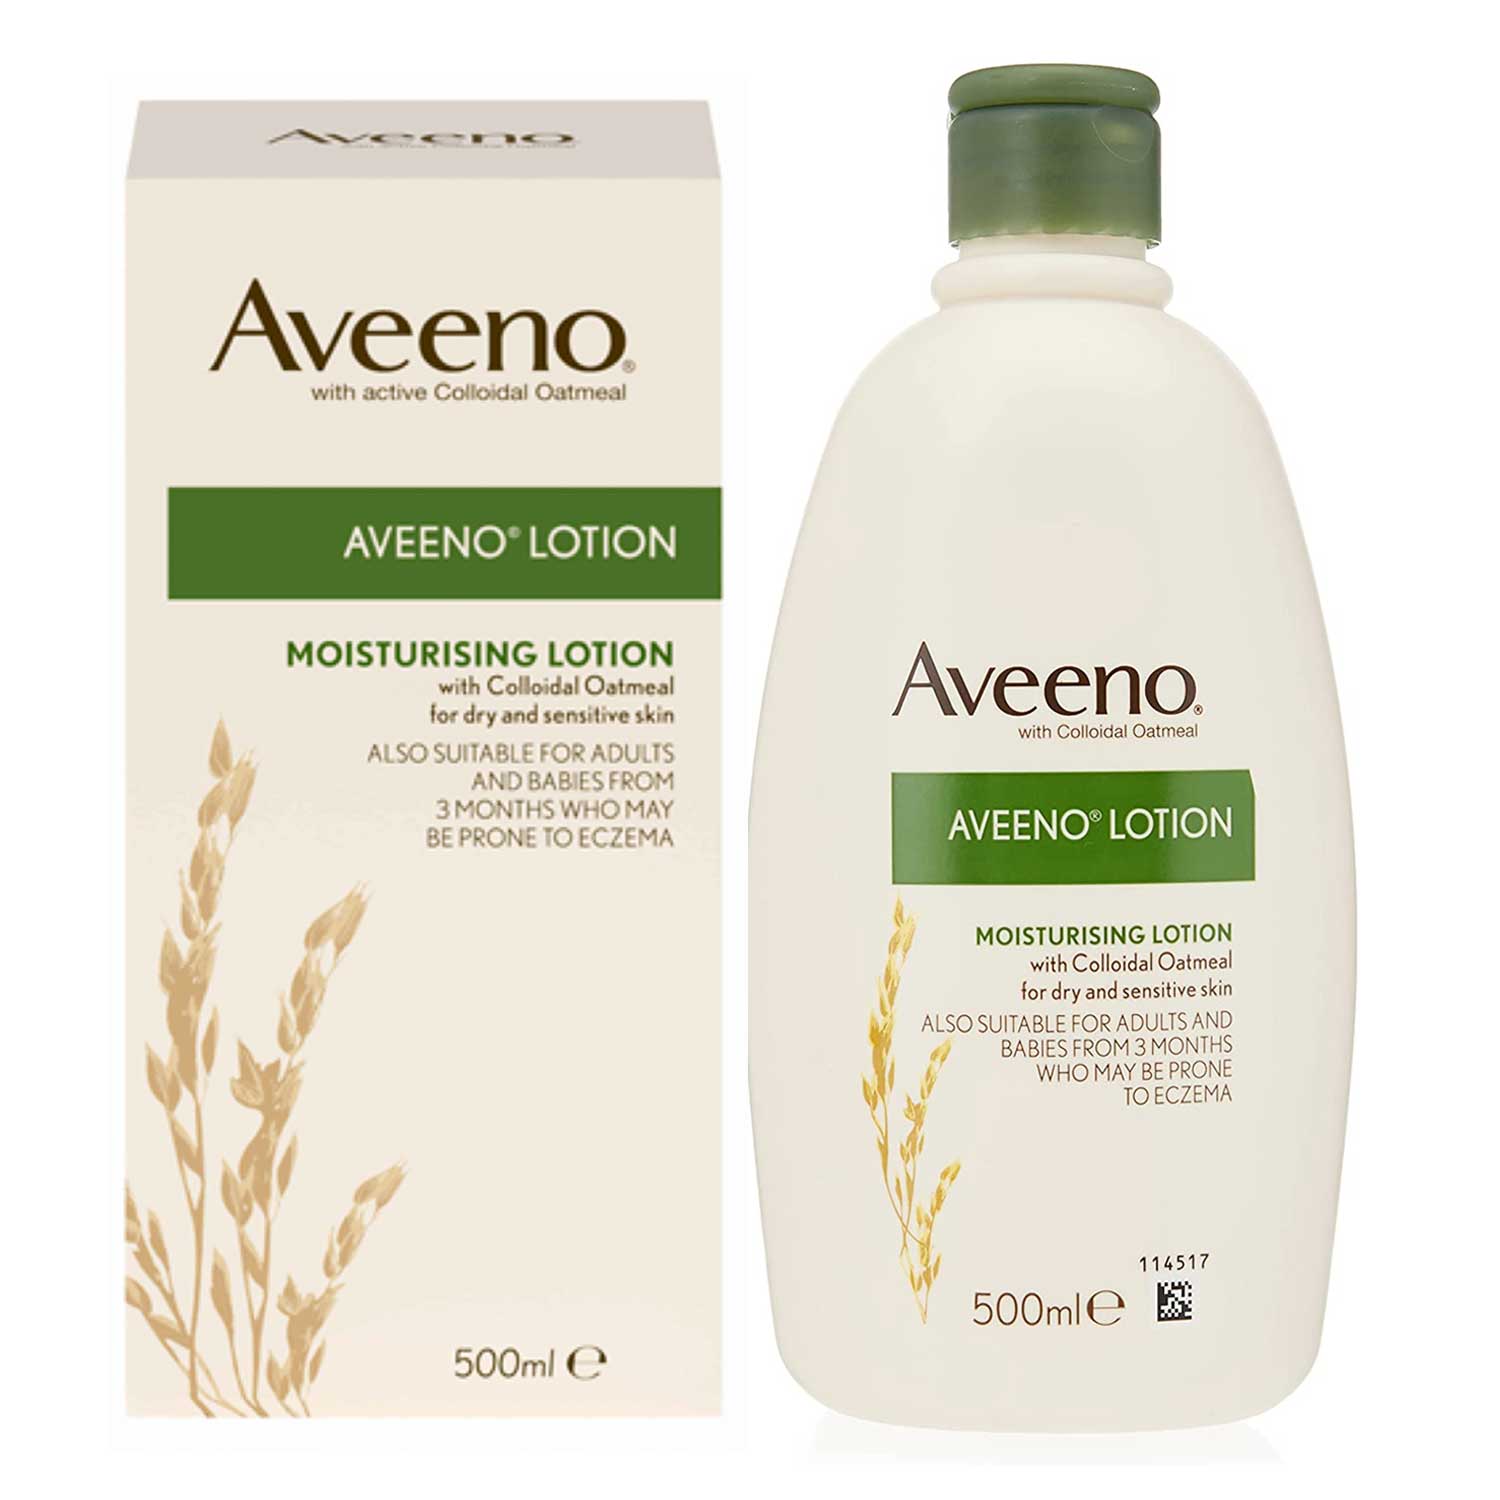 Aveeno-Lotion-with-Active-Colloidal-Oatmeal